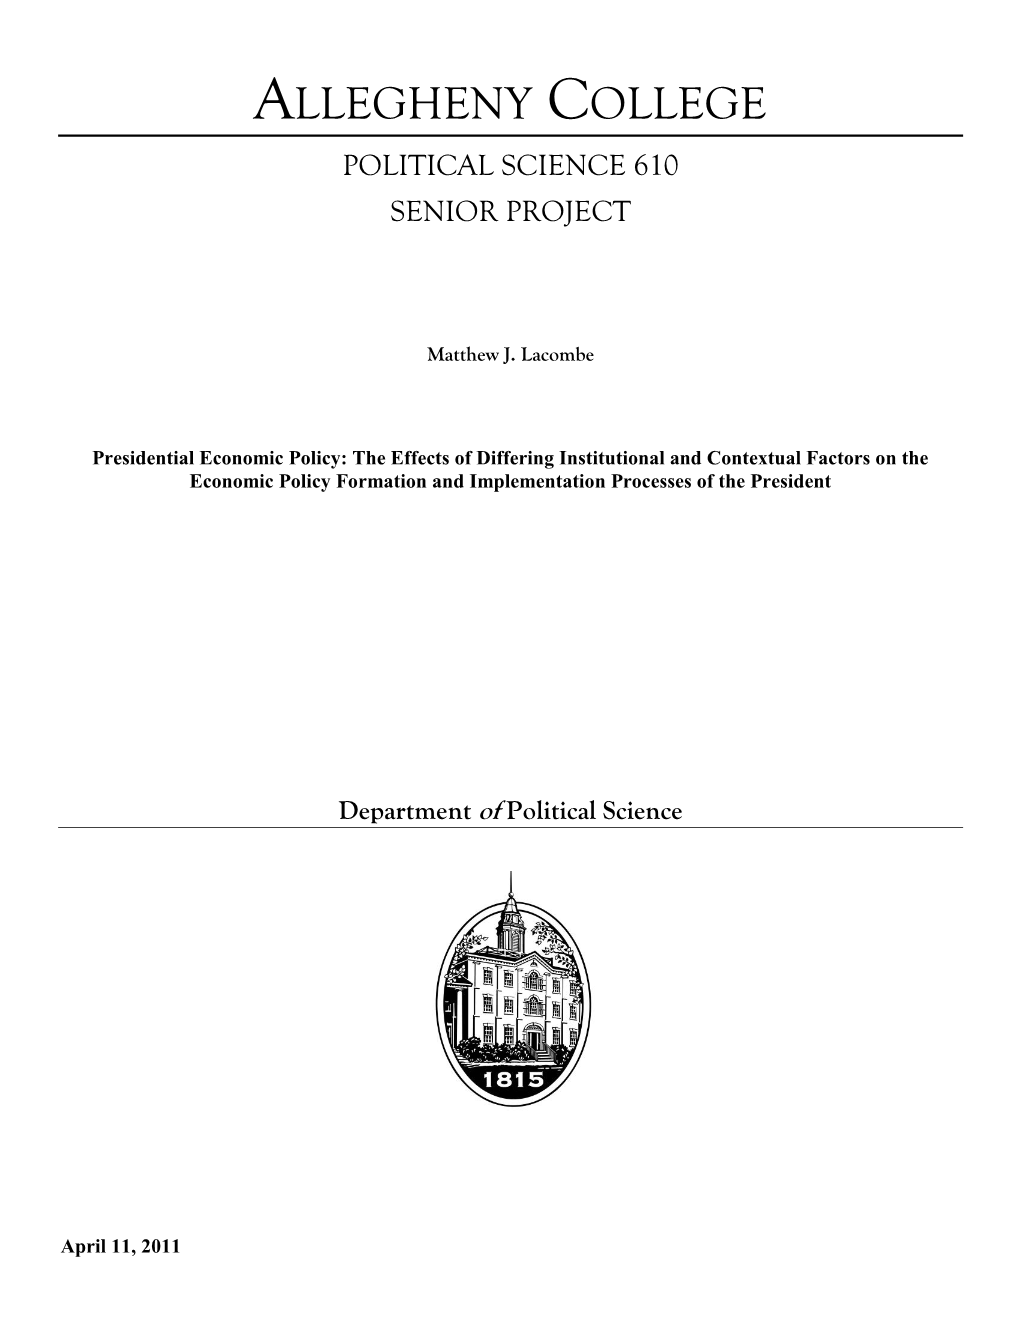 Allegheny College Political Science 610 Senior Project